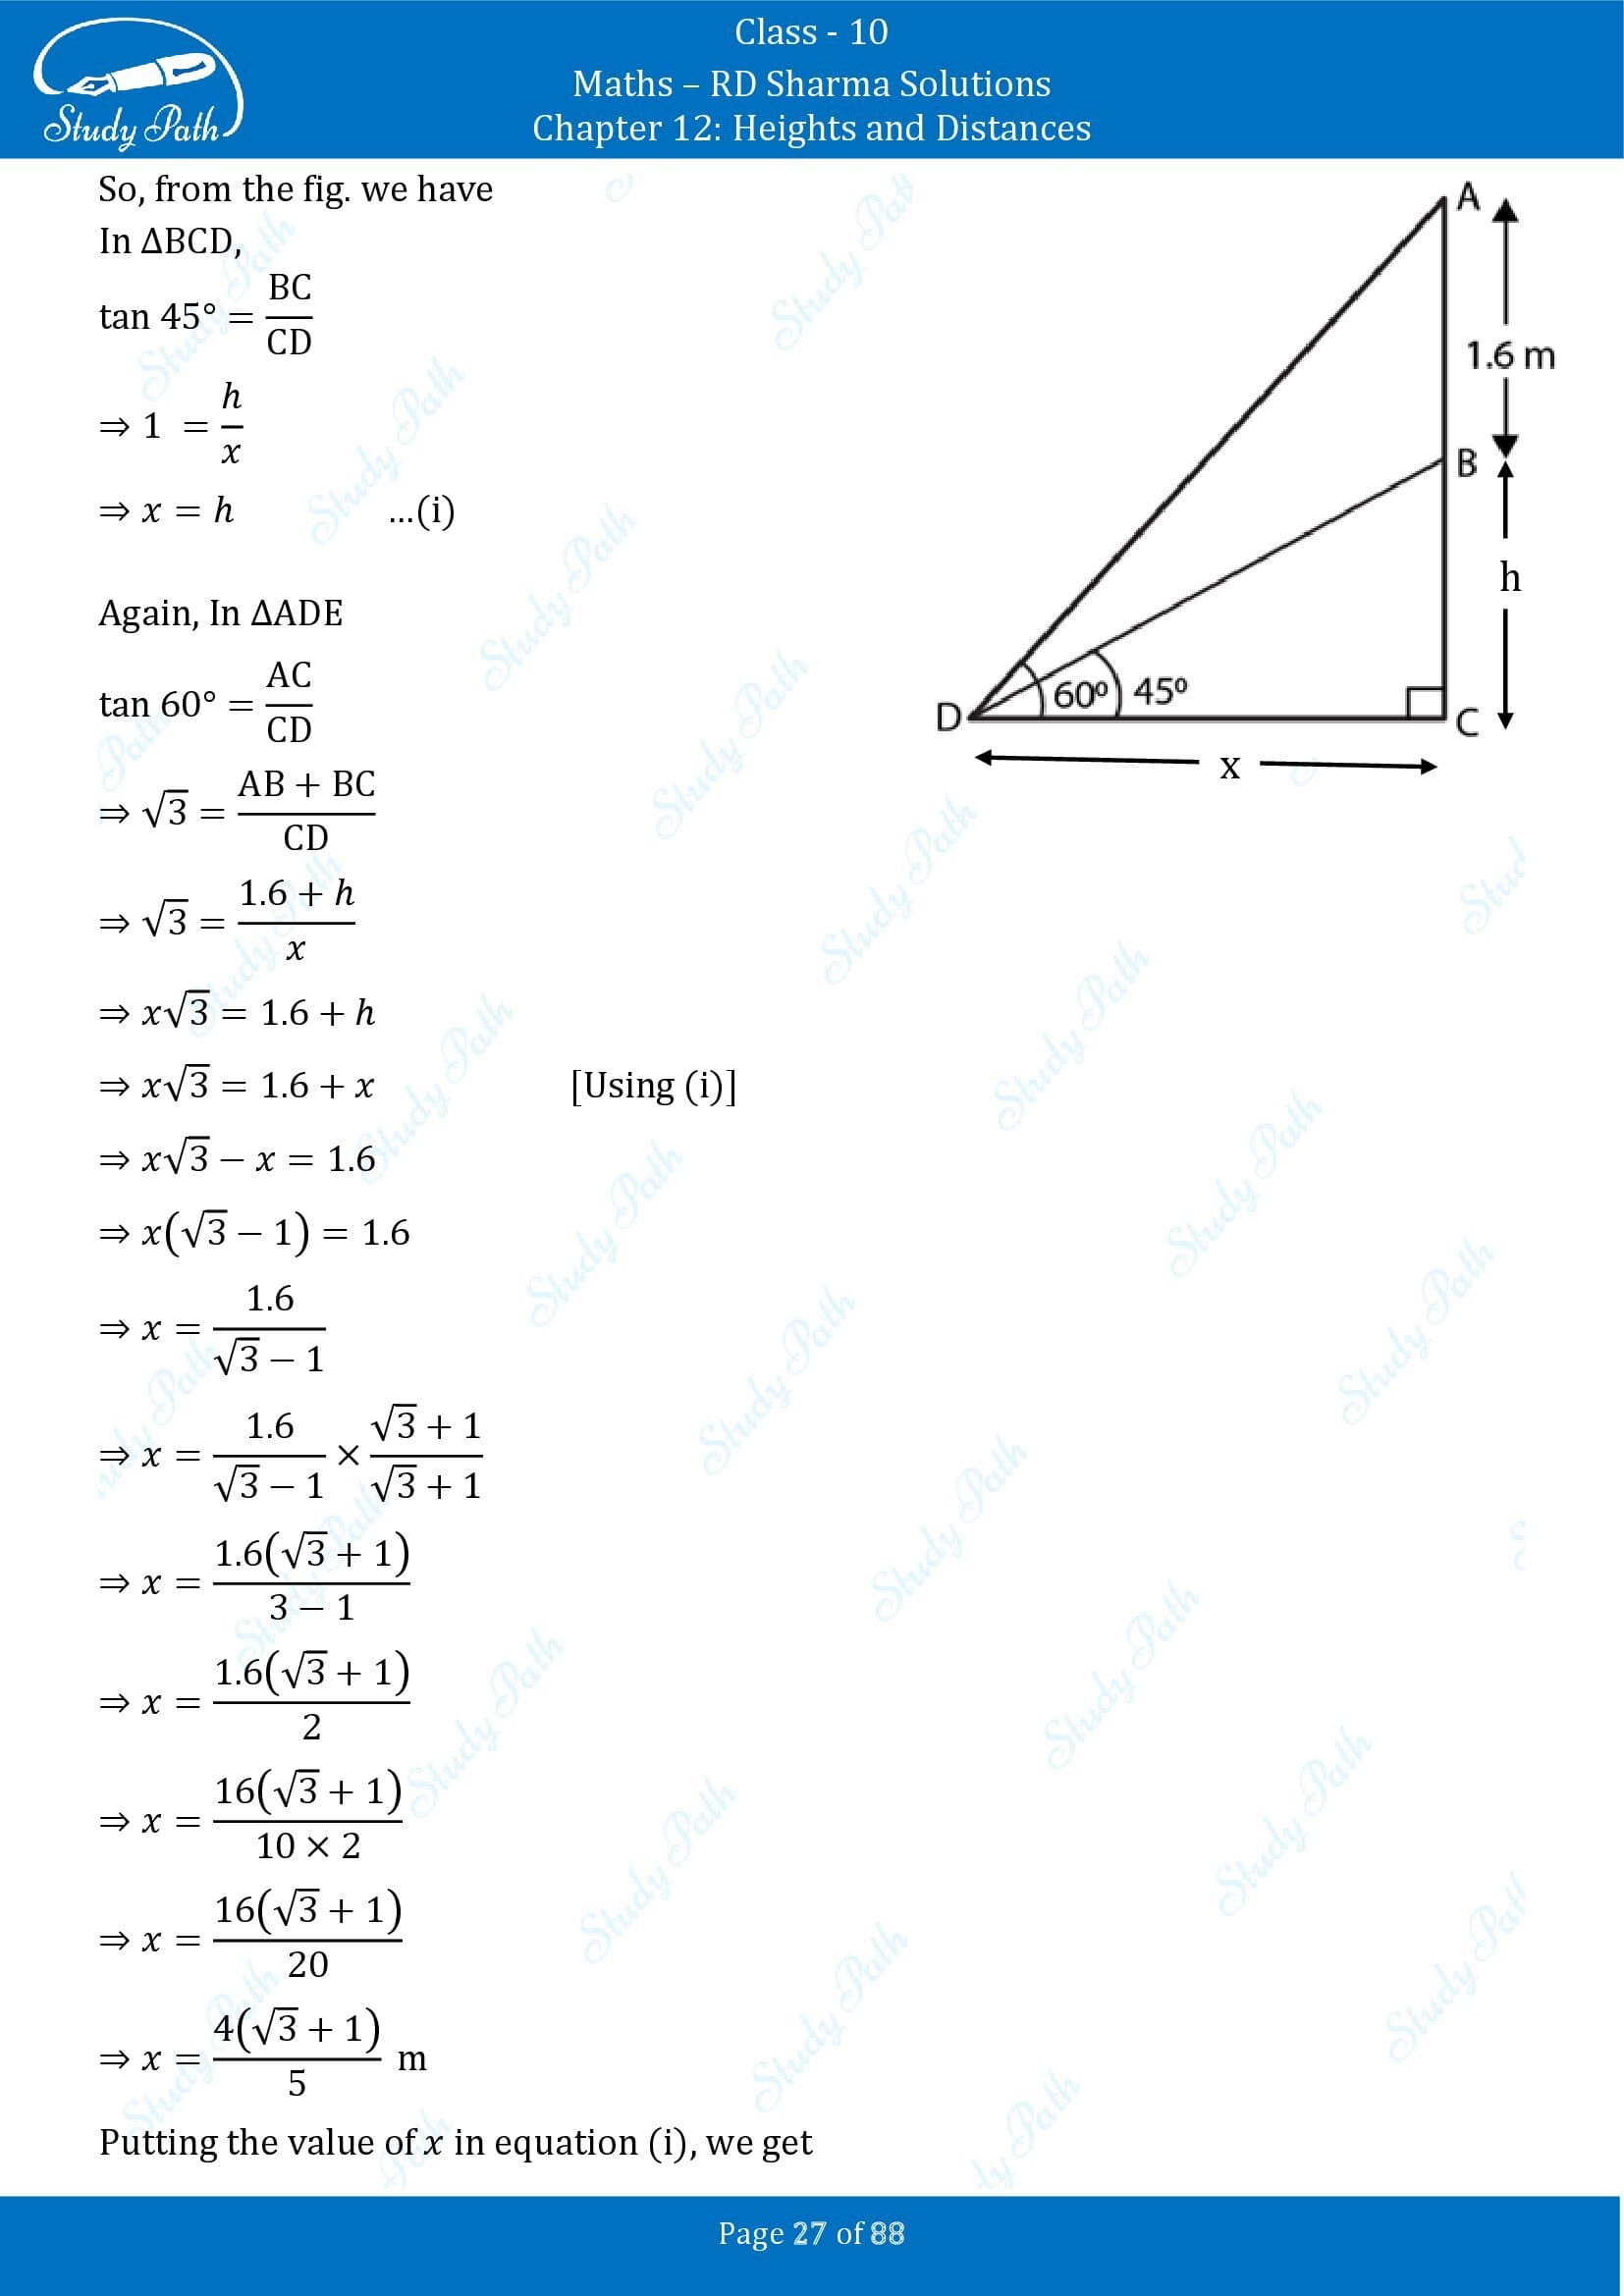 RD Sharma Solutions Class 10 Chapter 12 Heights and Distances Exercise 12.1 00027